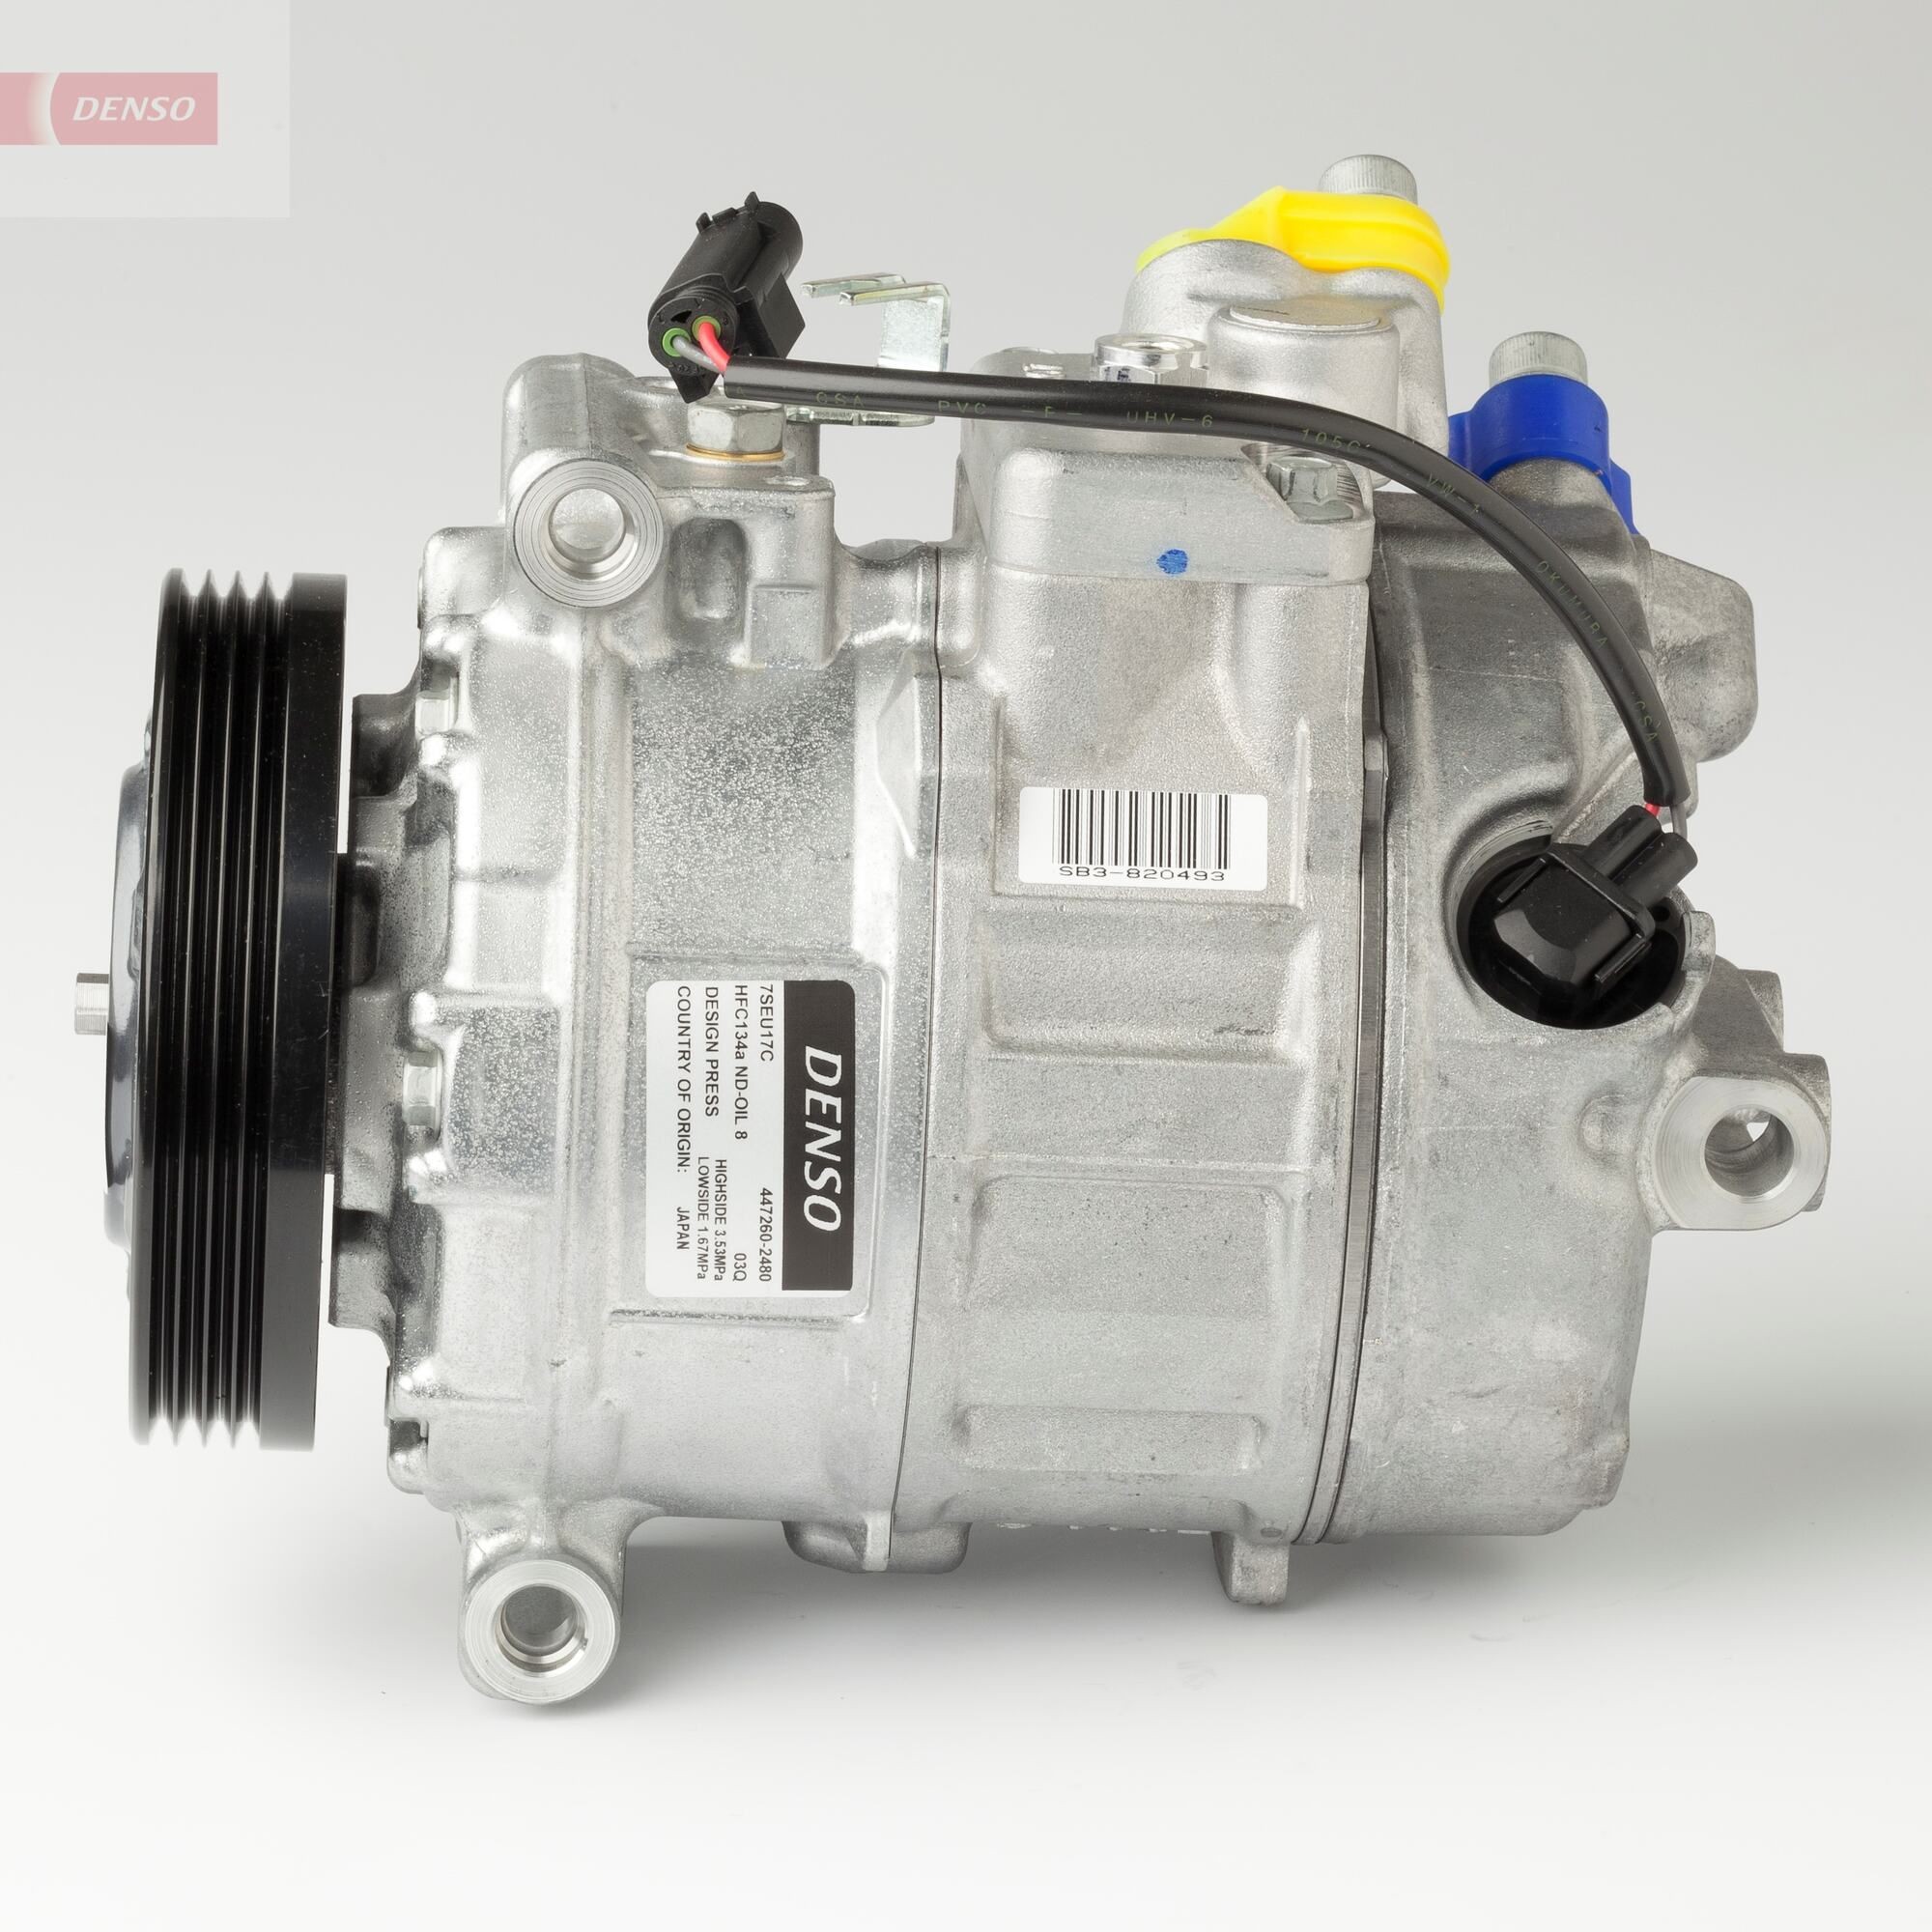 Air conditioning compressor DCP21017 from DENSO